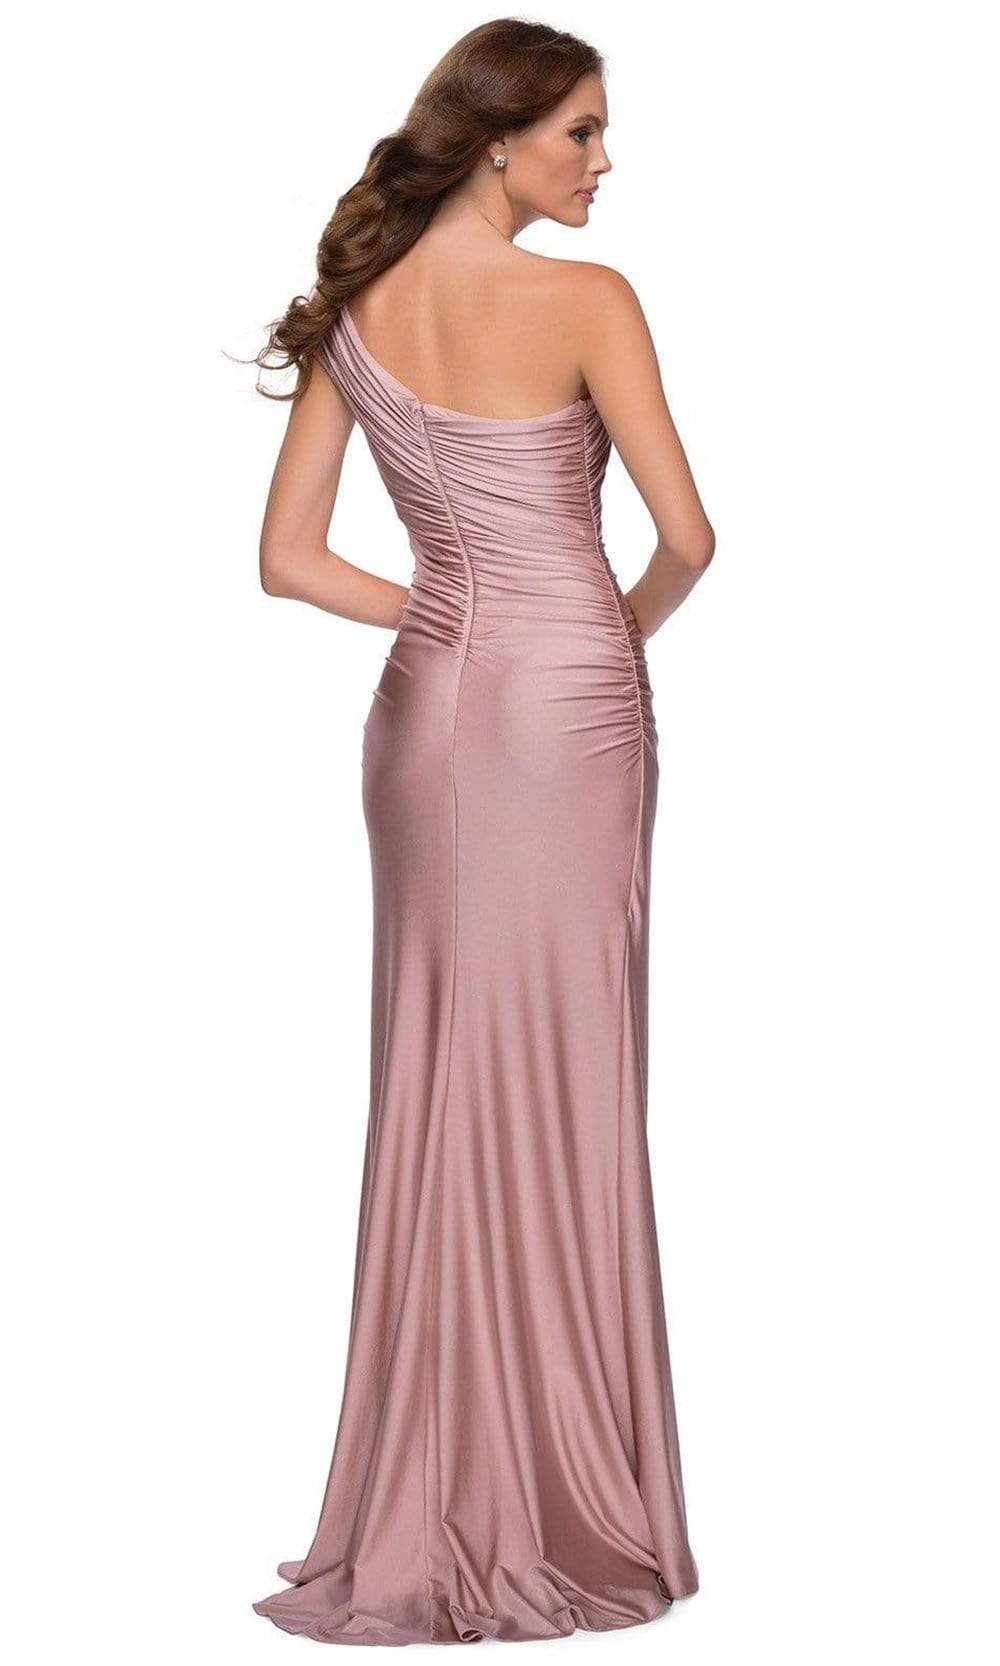 La Femme - 29619SC Asymmetric Neck Ruched Sheath Dress With Slit In Pink